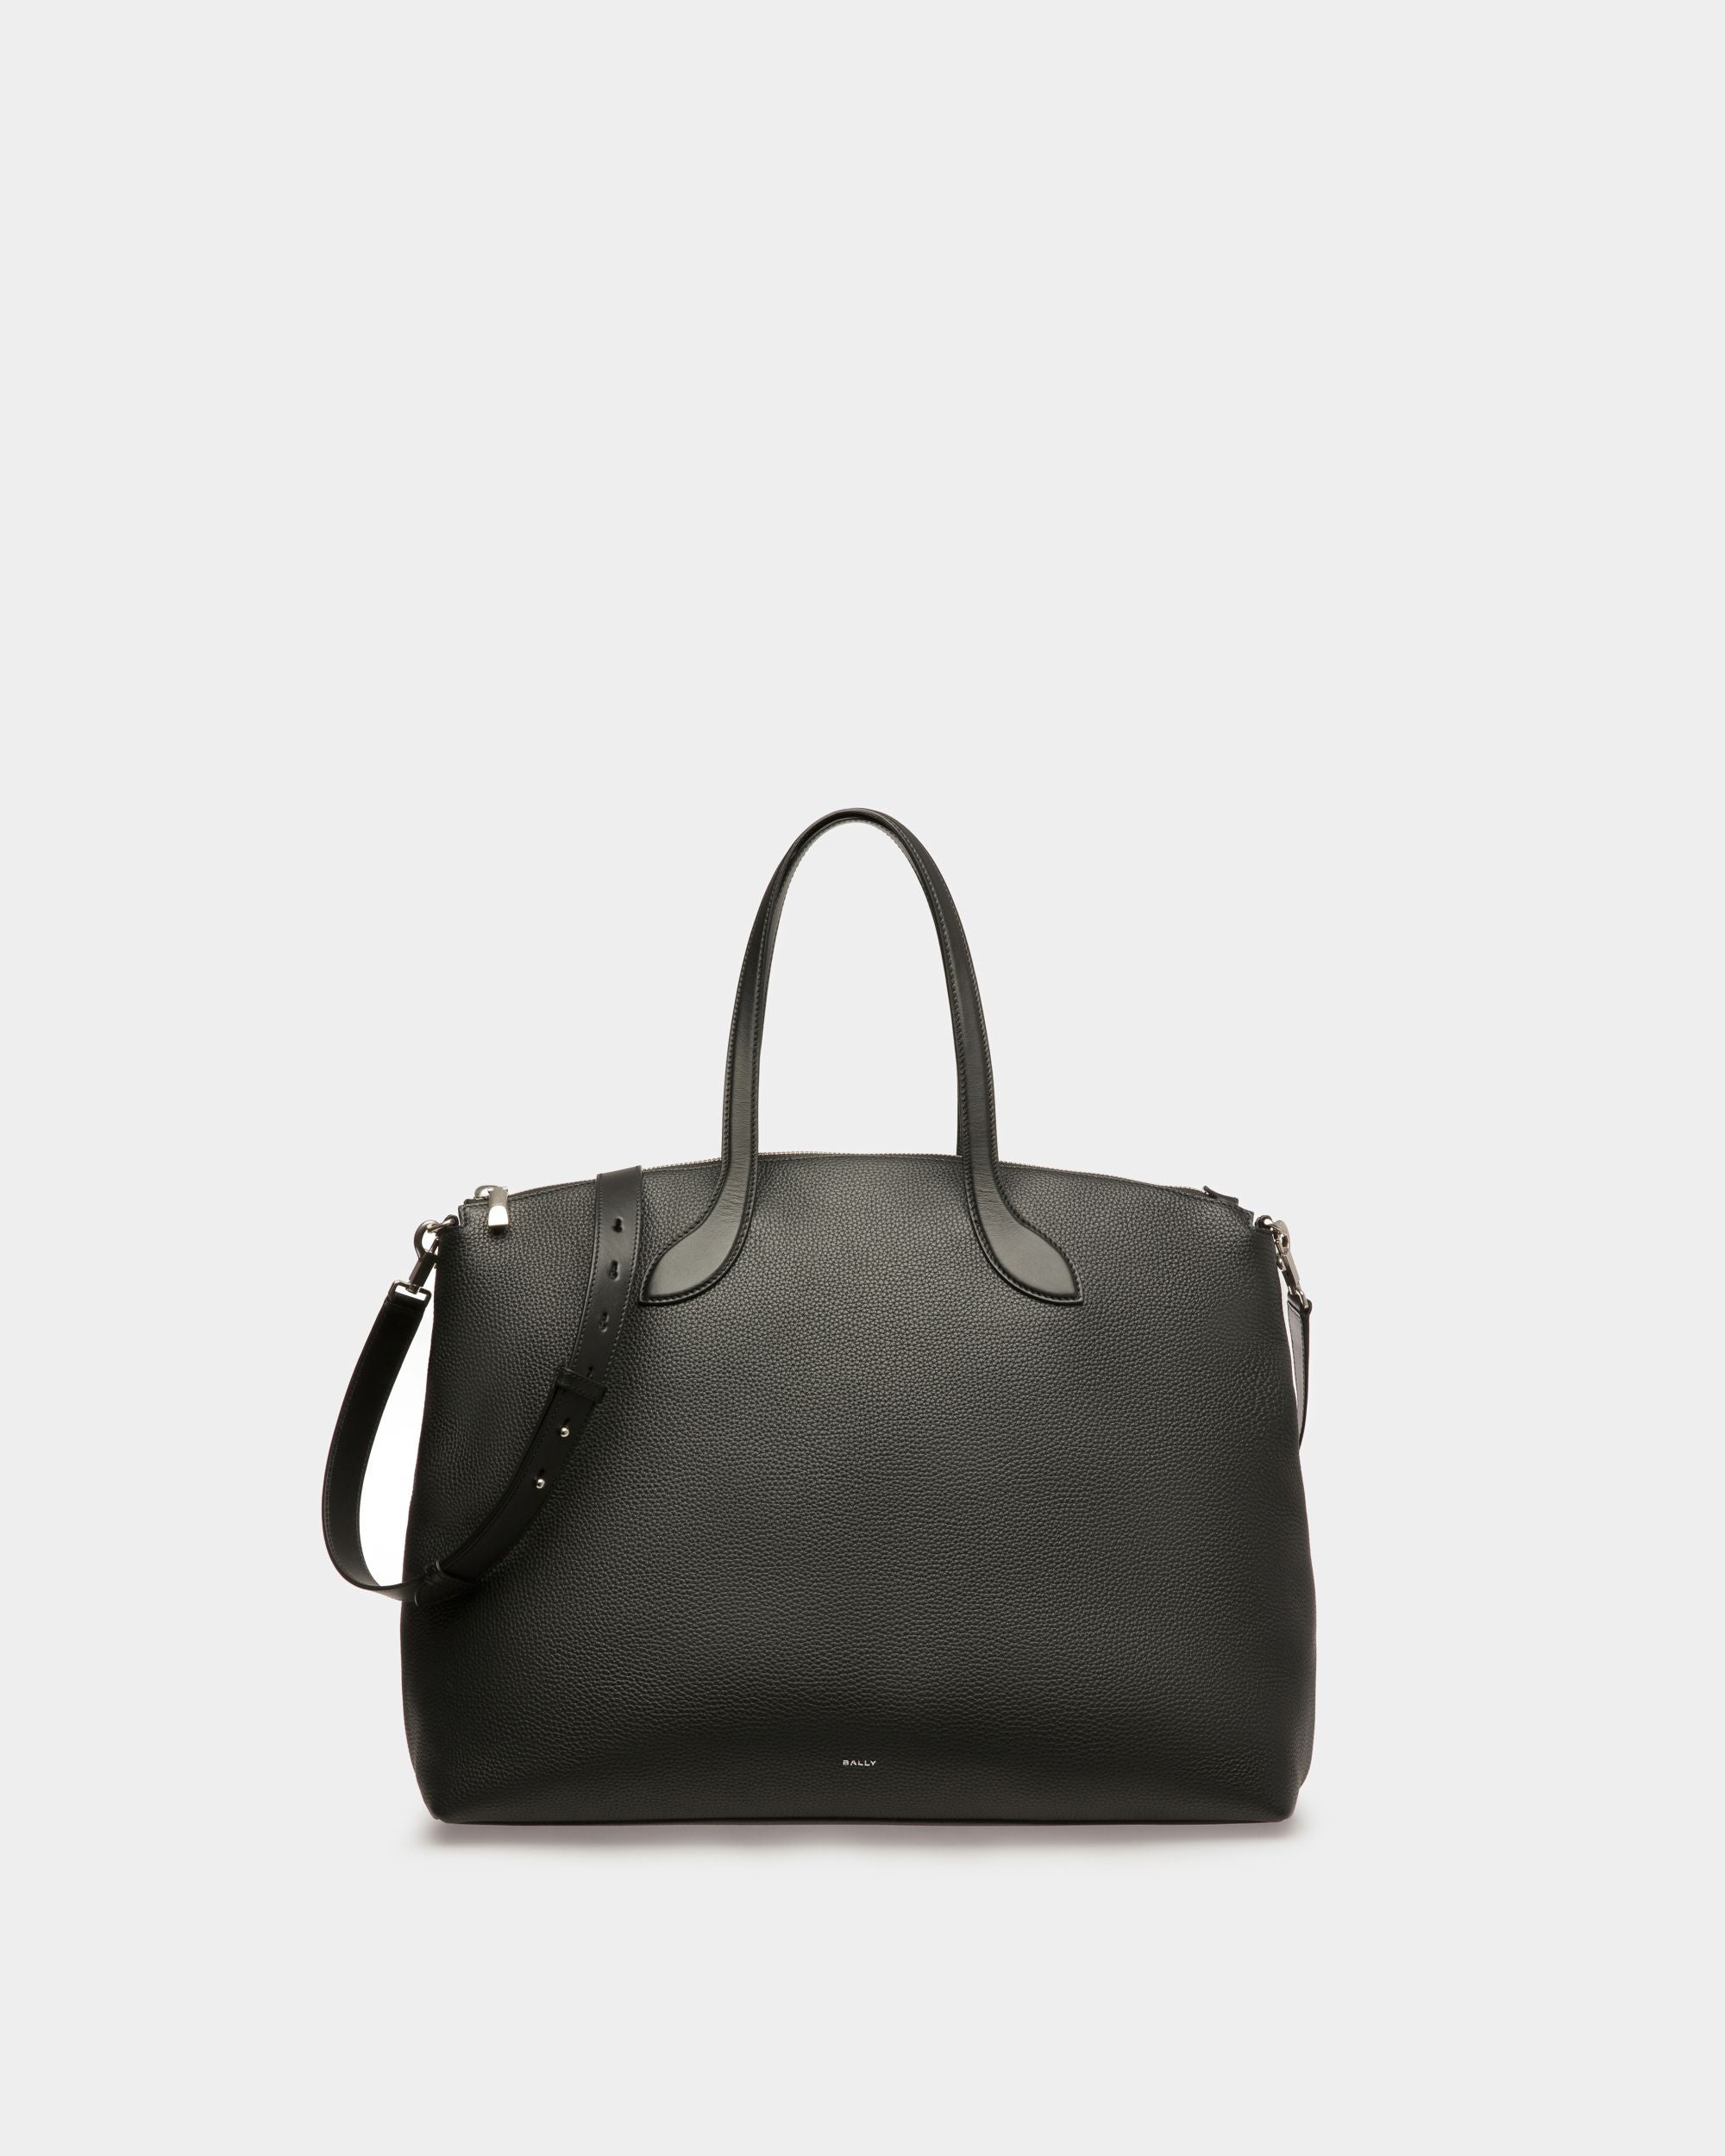 Shaped | Men's Tote Bag | Black Leather | Bally | Still Life Front